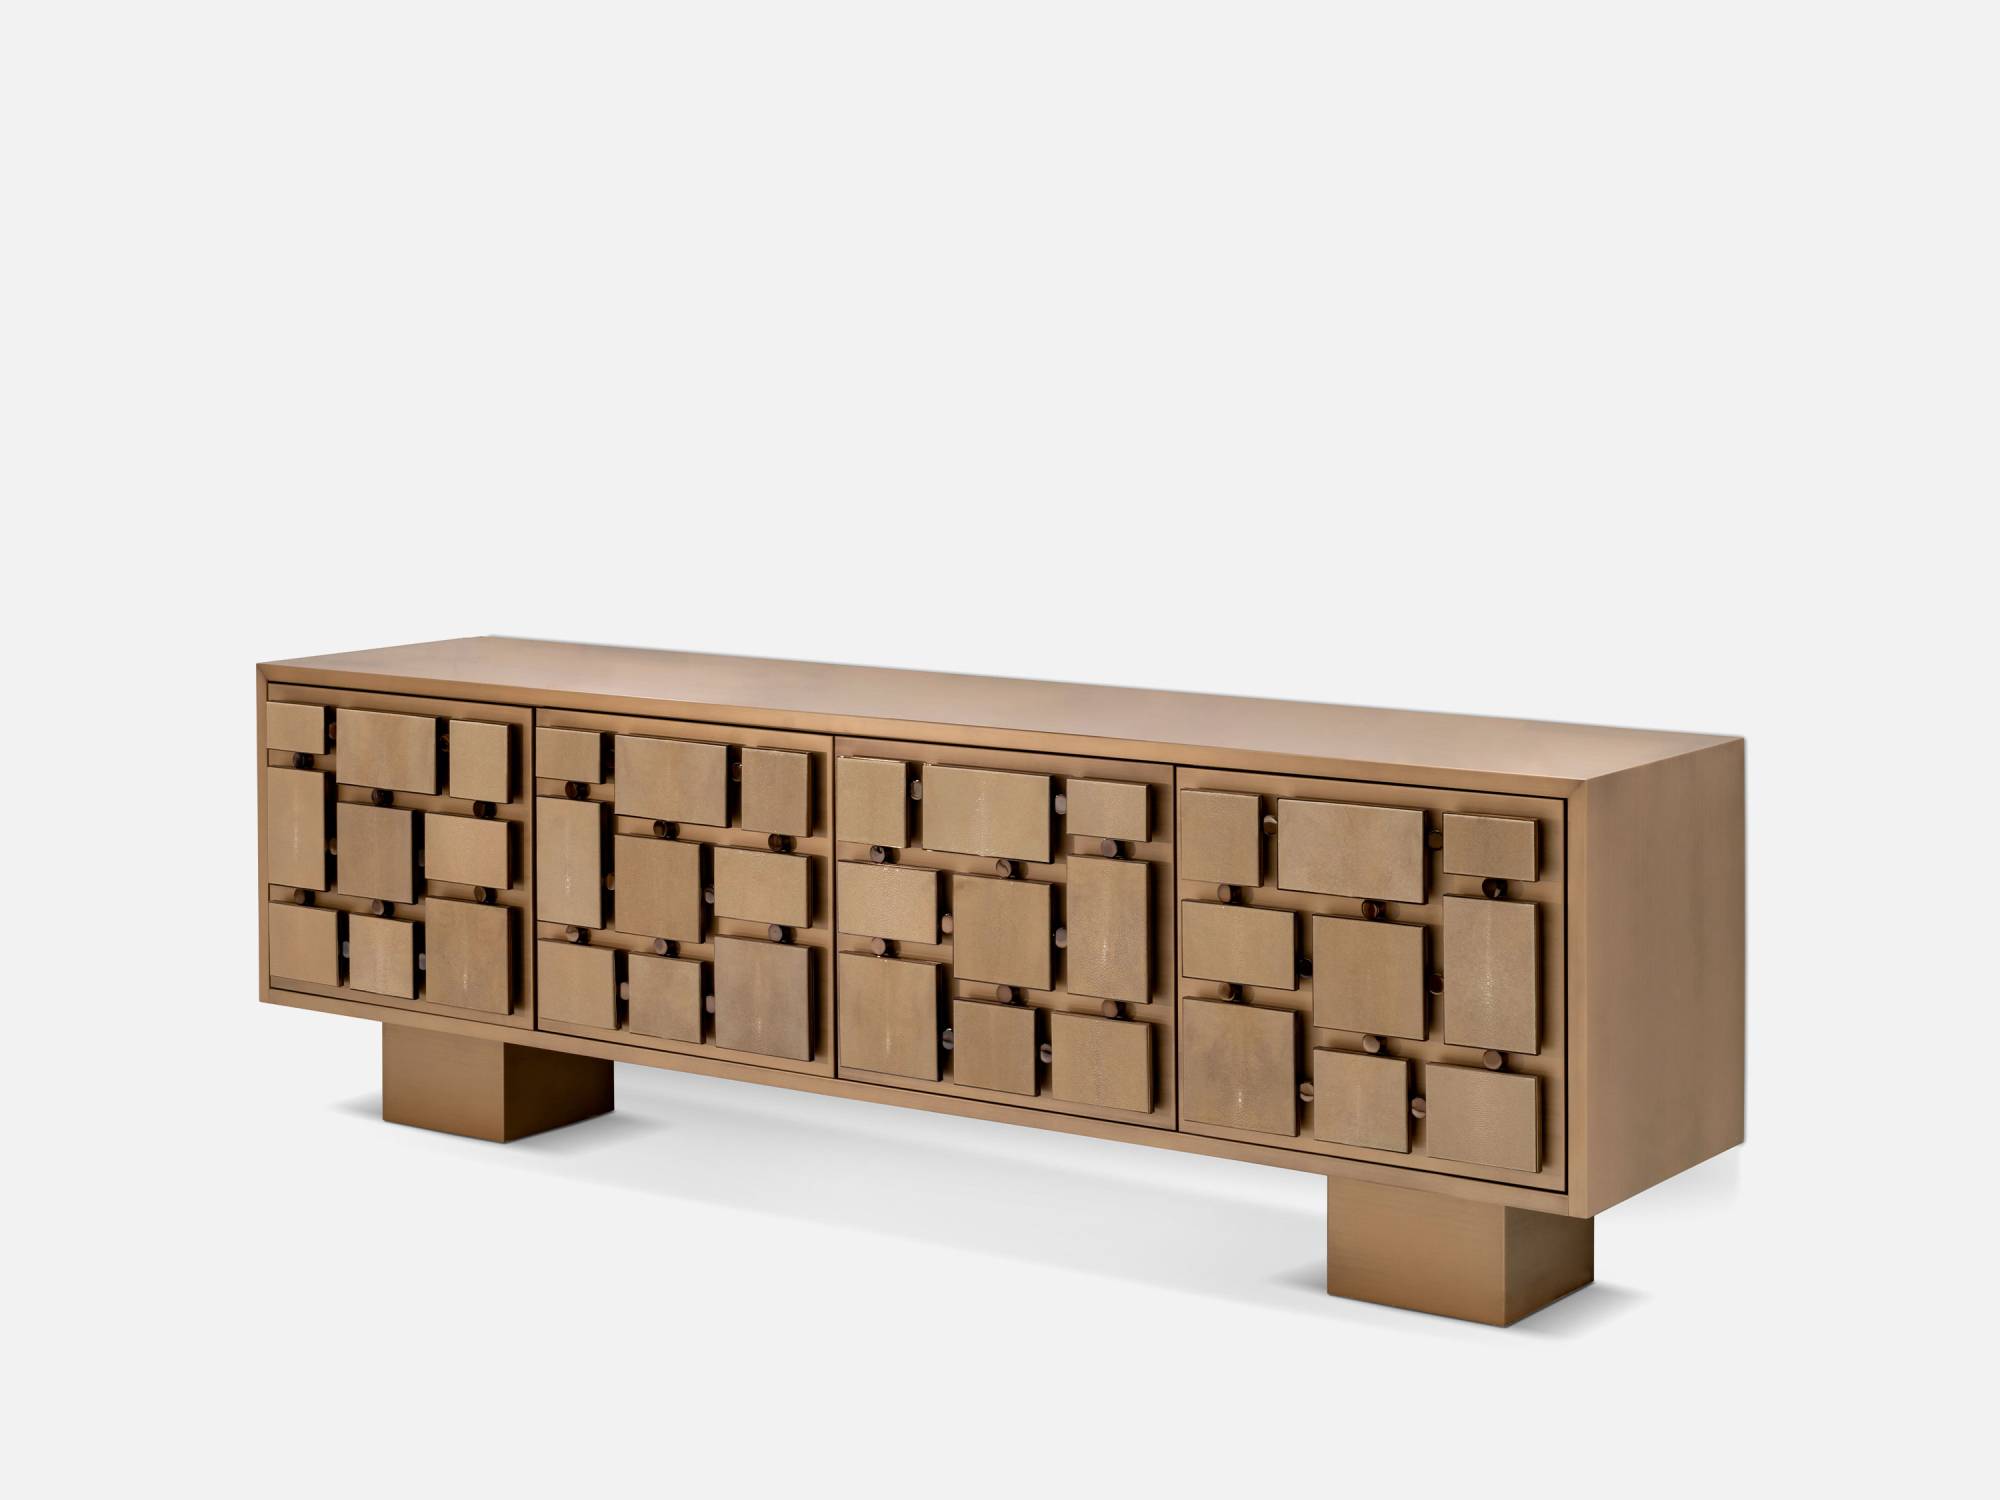 ART. 2279 - C.G. Capelletti quality furniture with made in Italy contemporary Sideboards